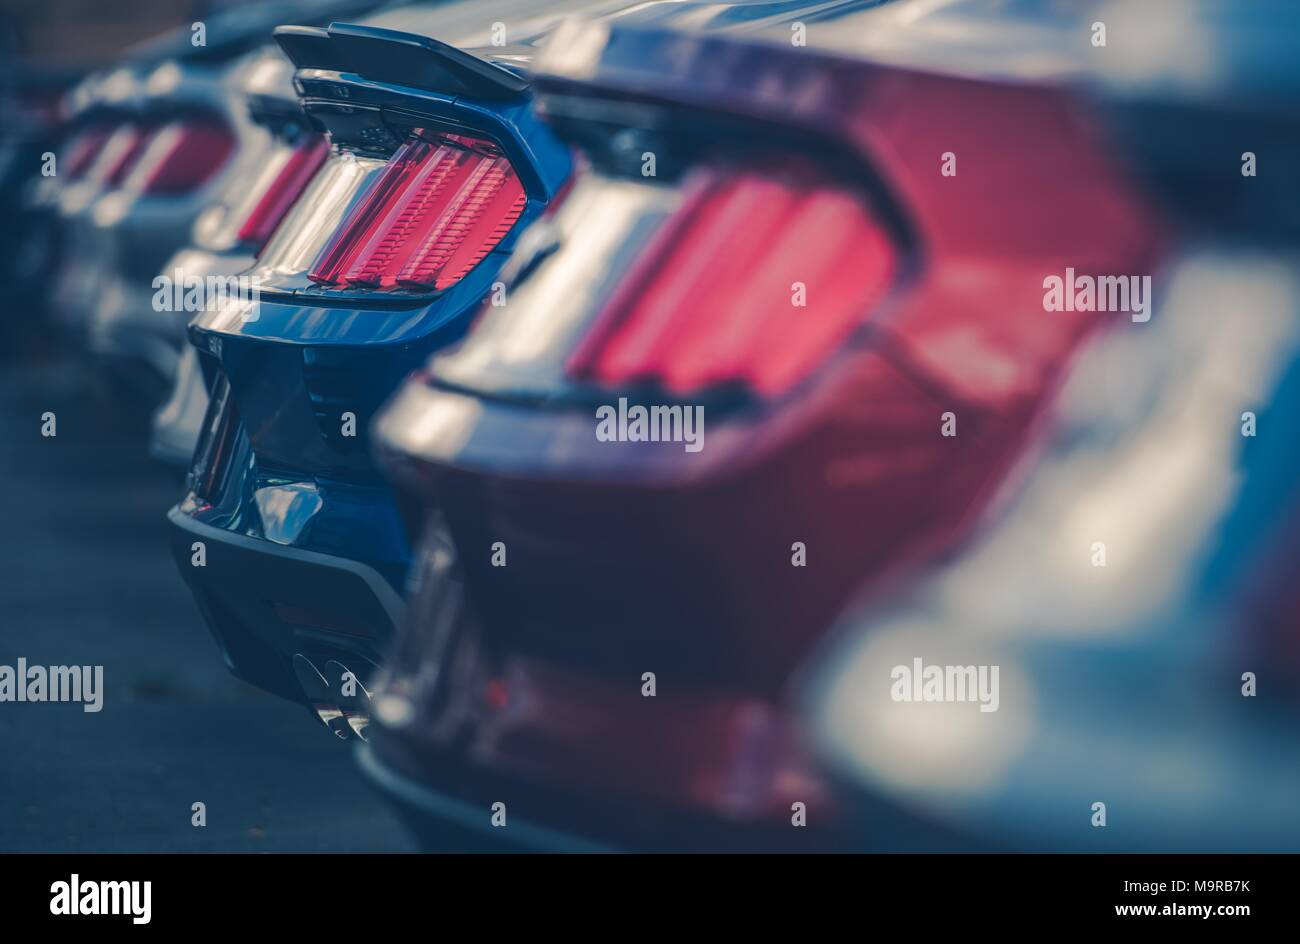 Modern Cars in Dealer Stock. Vehicles Dealership. Row of Cars Closeup Photo. Automotive and Transportation Theme. Stock Photo